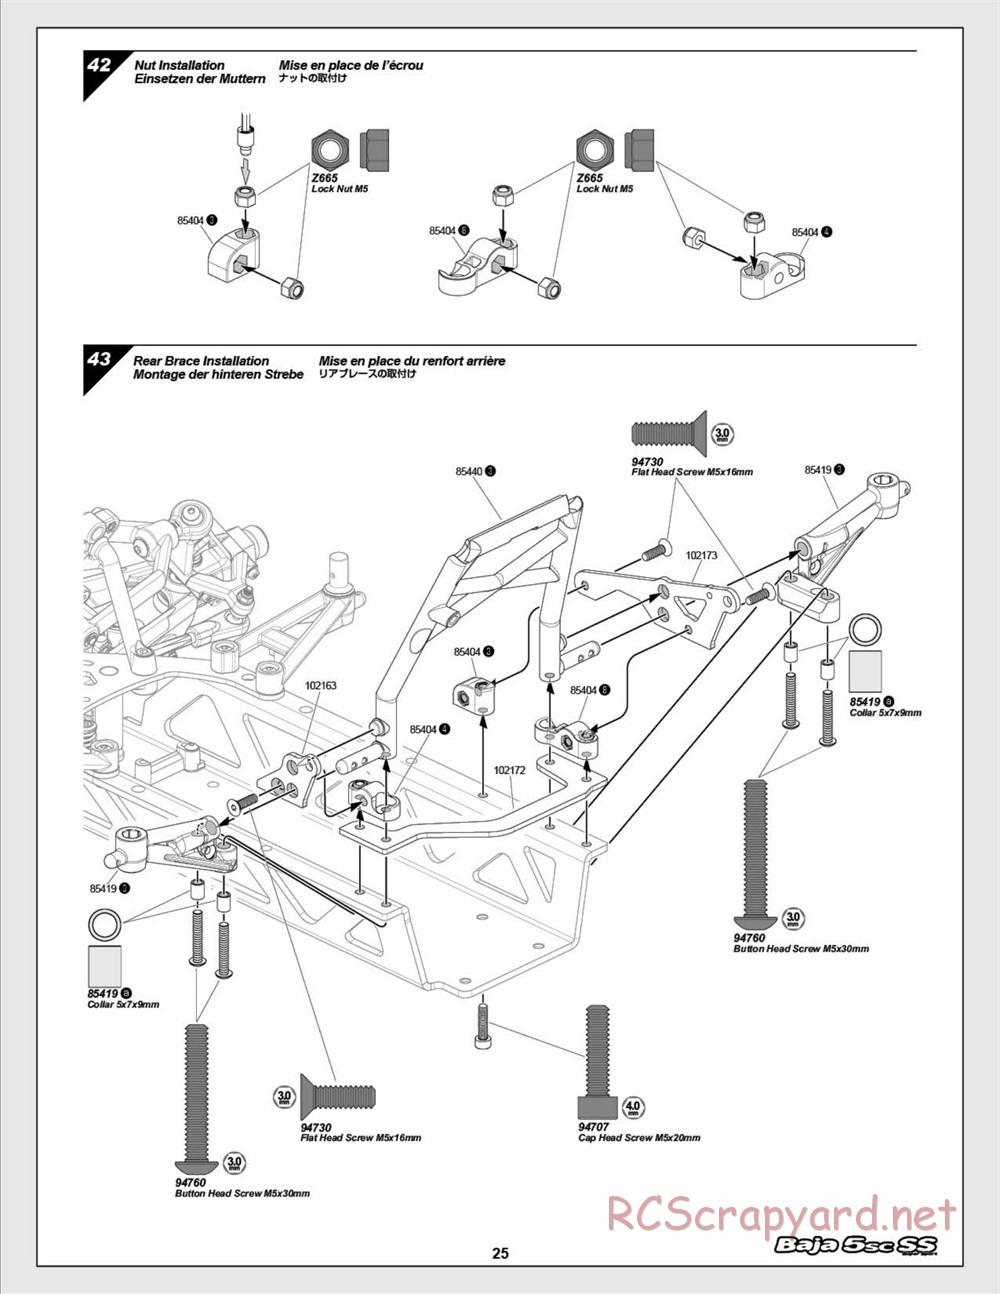 HPI - Baja 5SC SS - Exploded View - Page 25